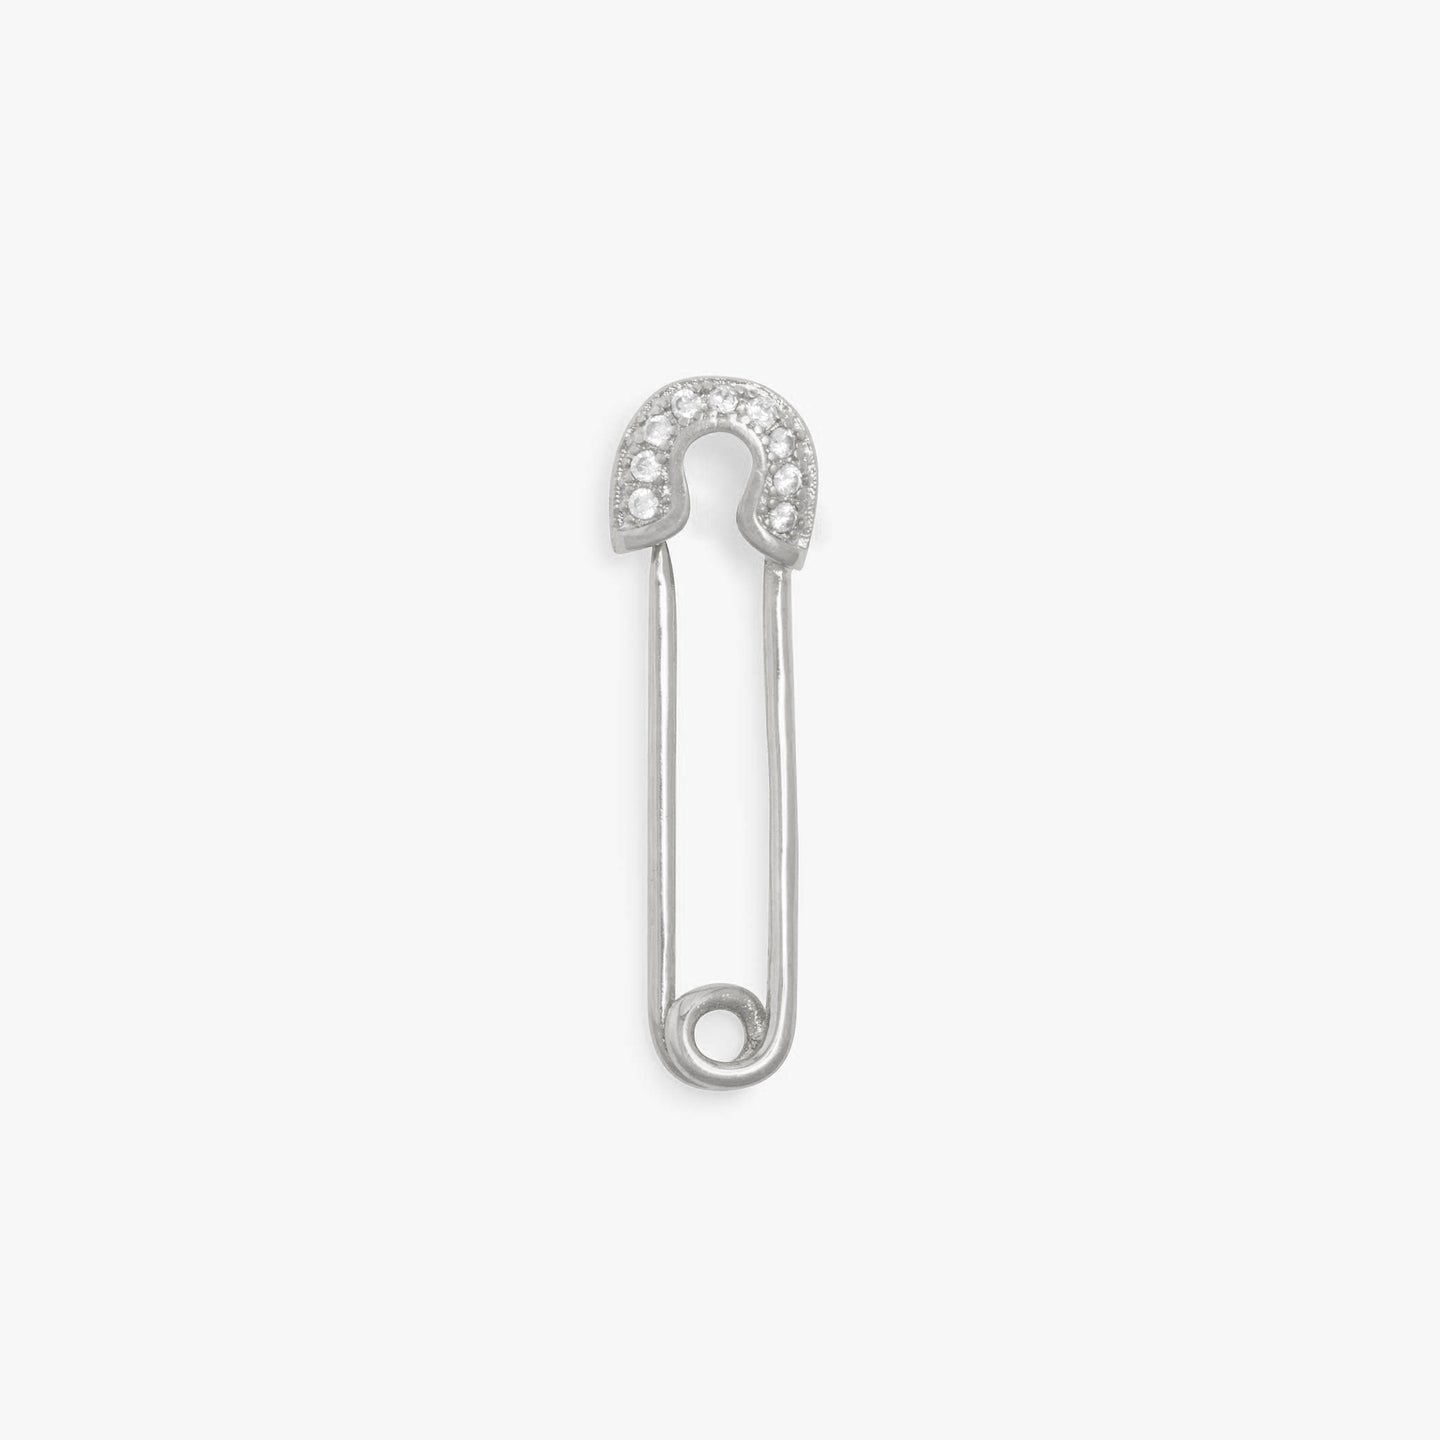 Small safety pin earring with CZ details. color:silver/clear